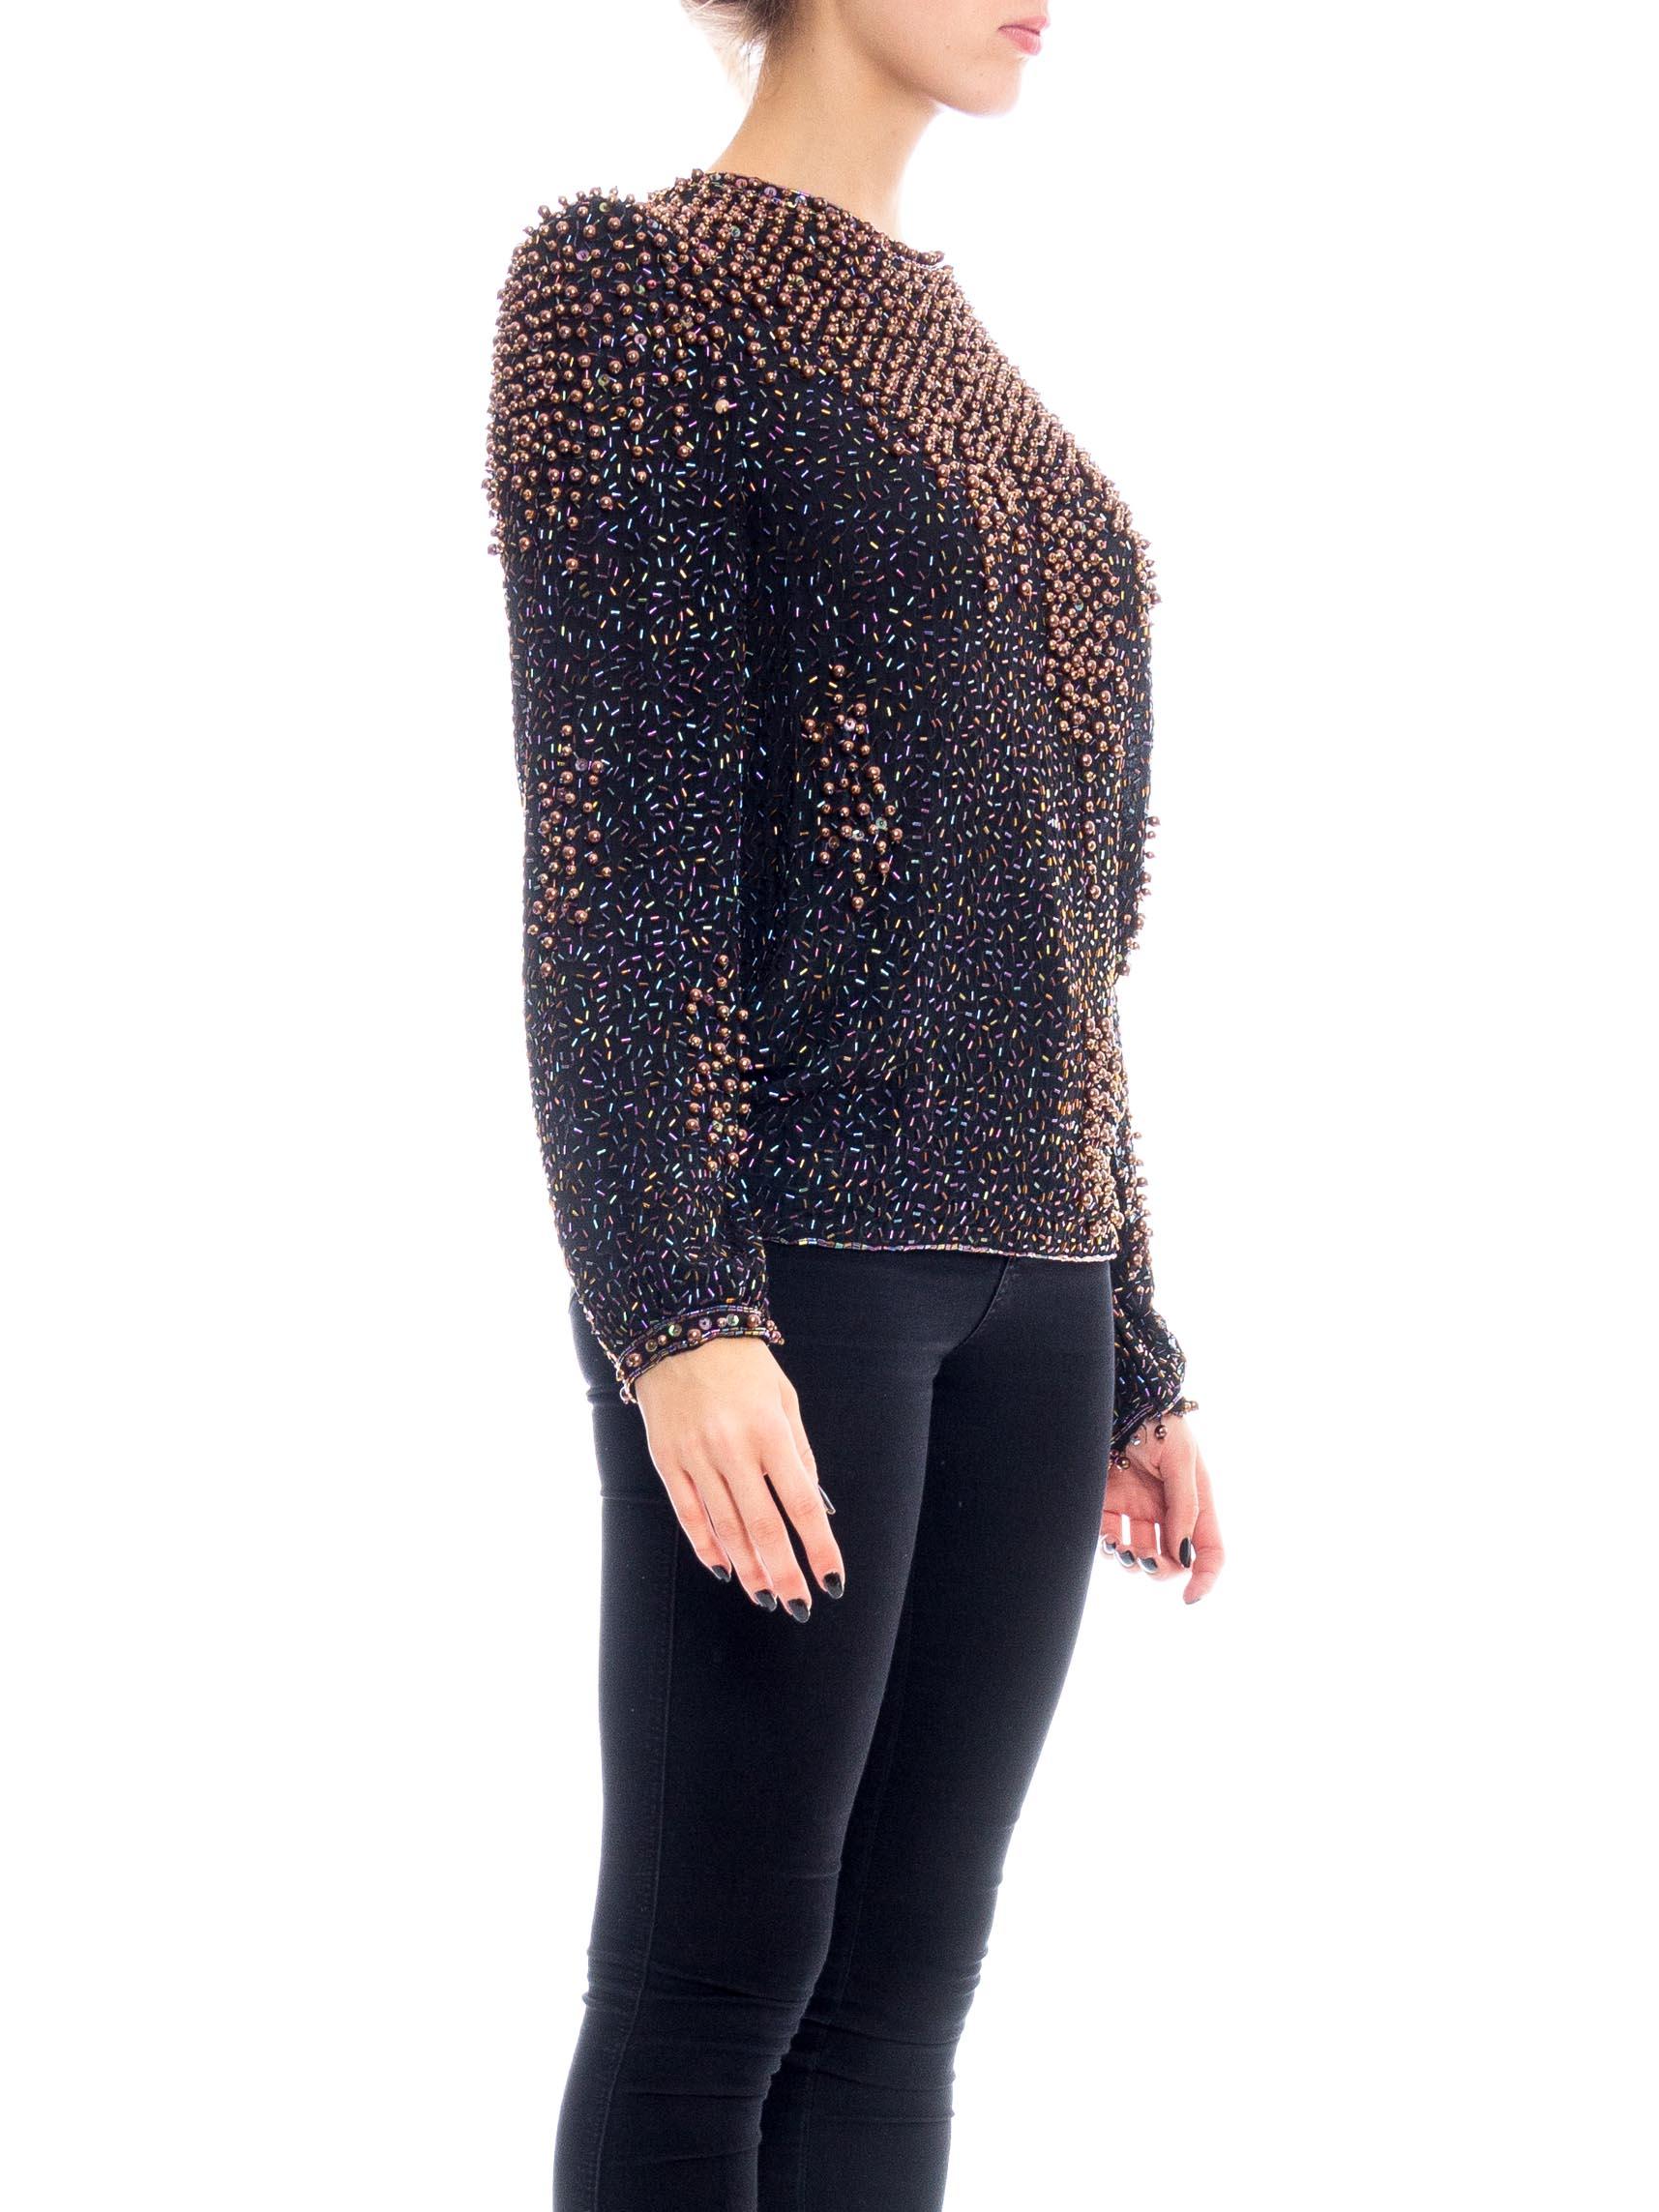 Women's 1980S Black Rayon Chiffon Hand Beaded Long Sleeve Blouse With Copper Pearls